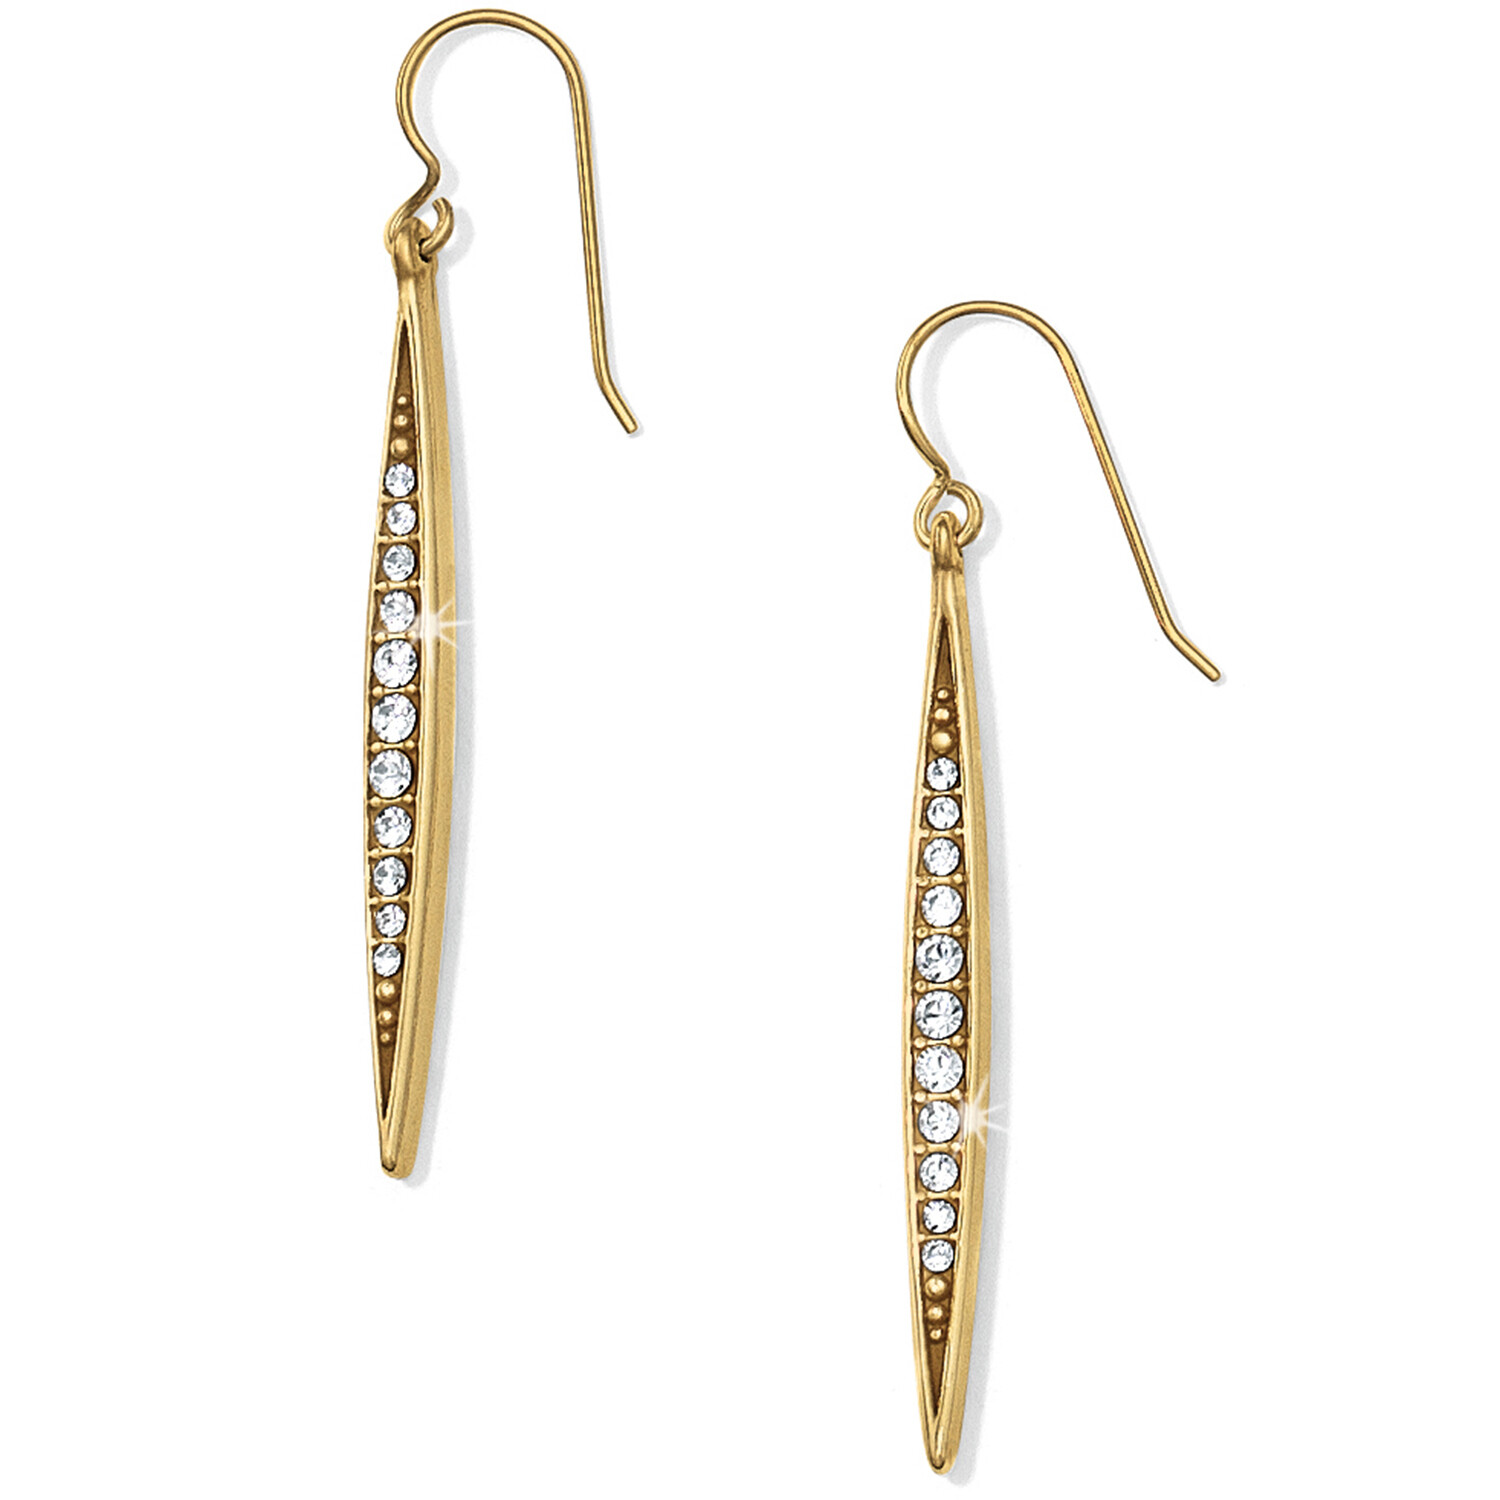 Contempo Ice Earrings